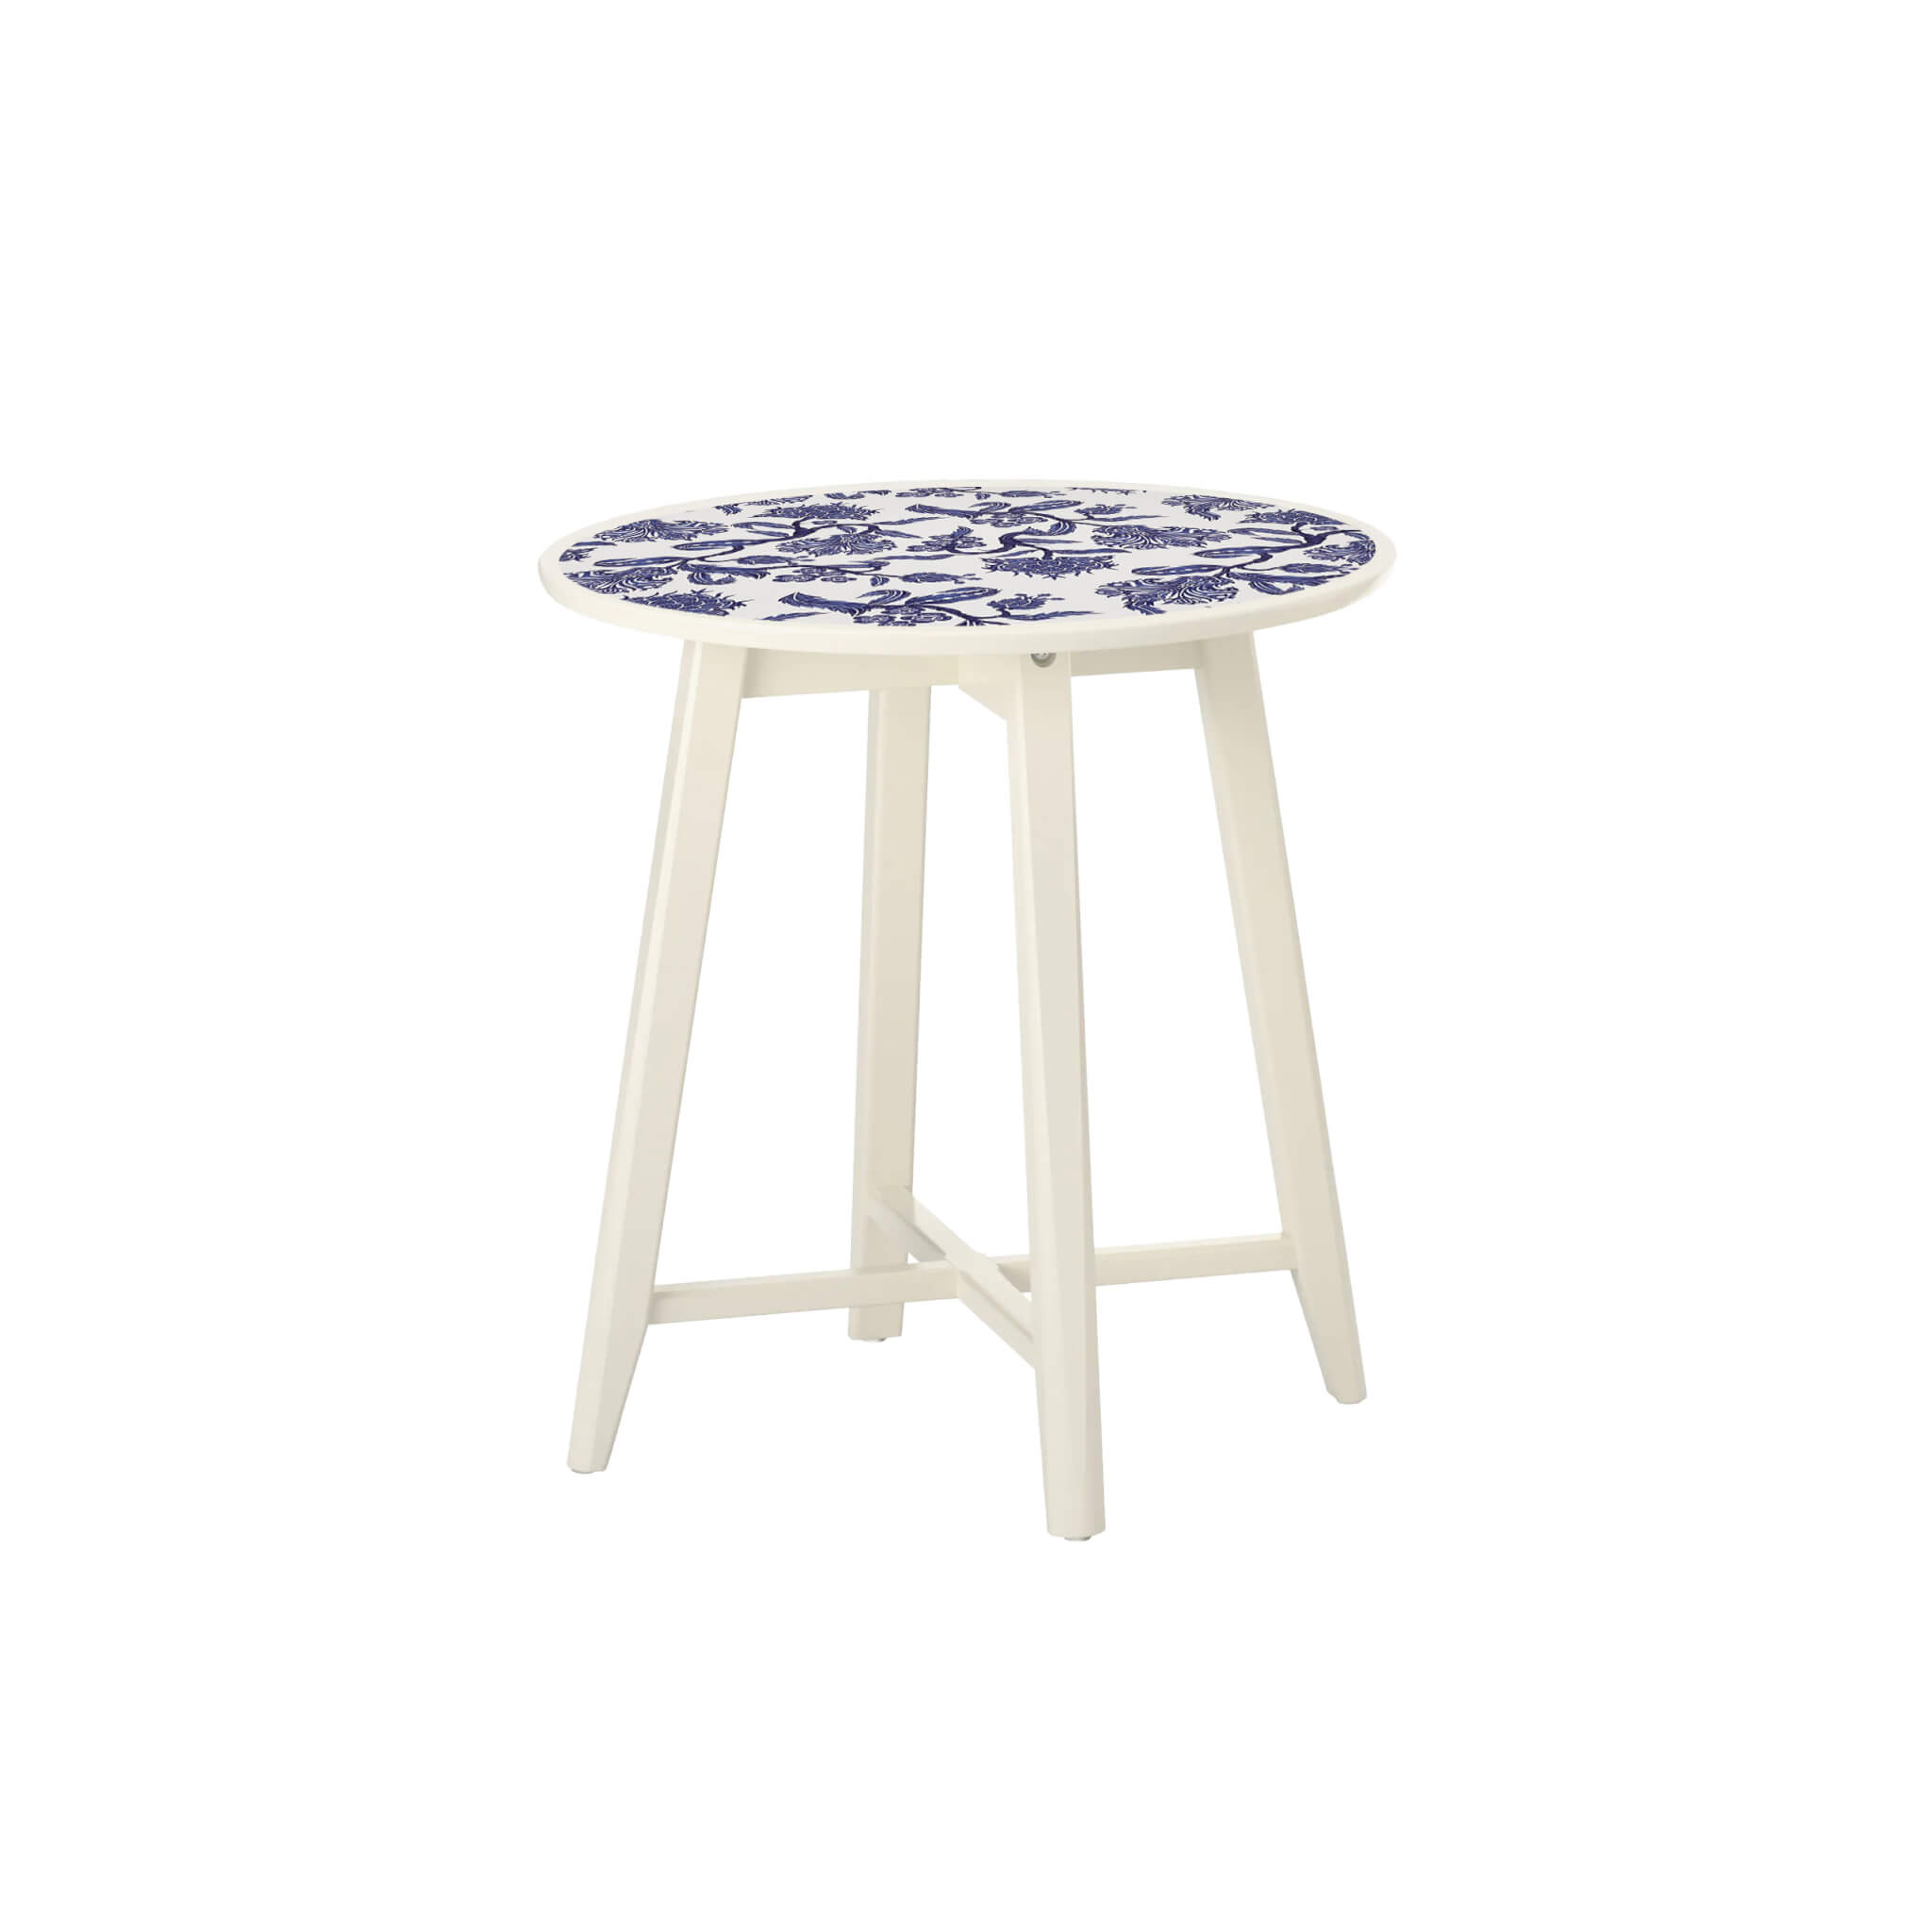 Chinoiserie Print Side Table – Blue and White – Large – 49cmW x 51cmH